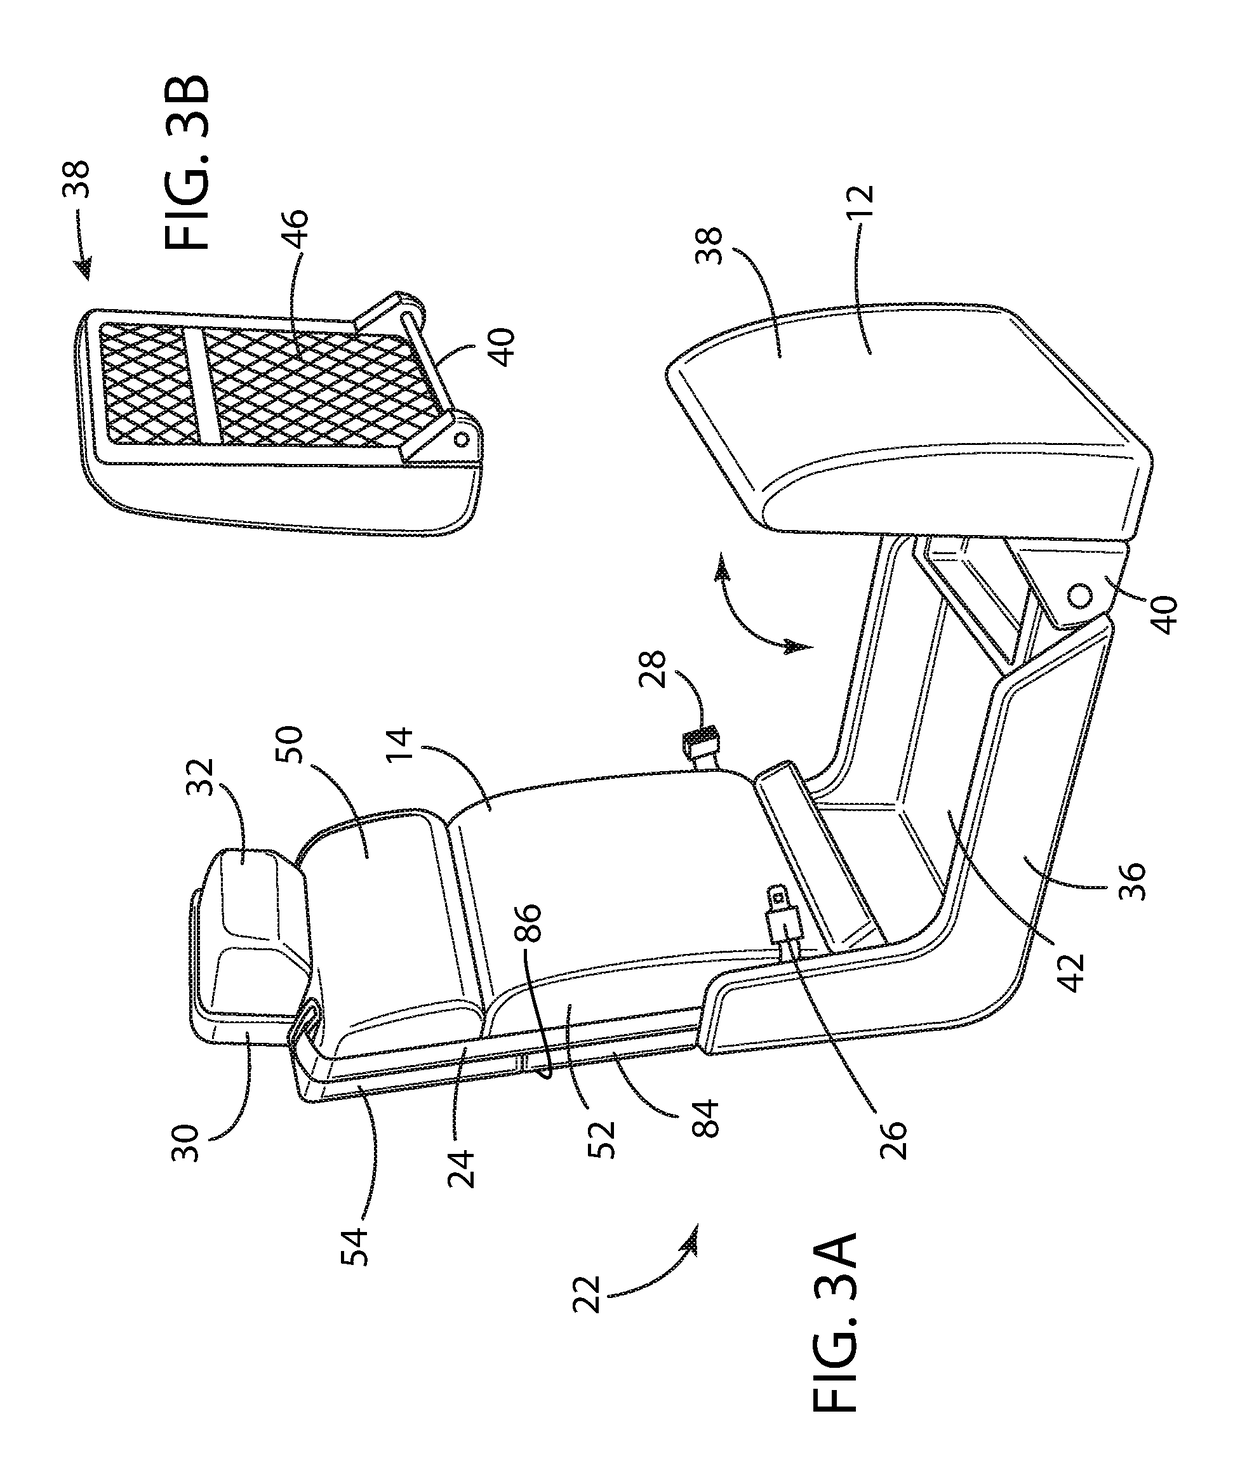 Flexible motor vehicle work surface for laptops and tablets